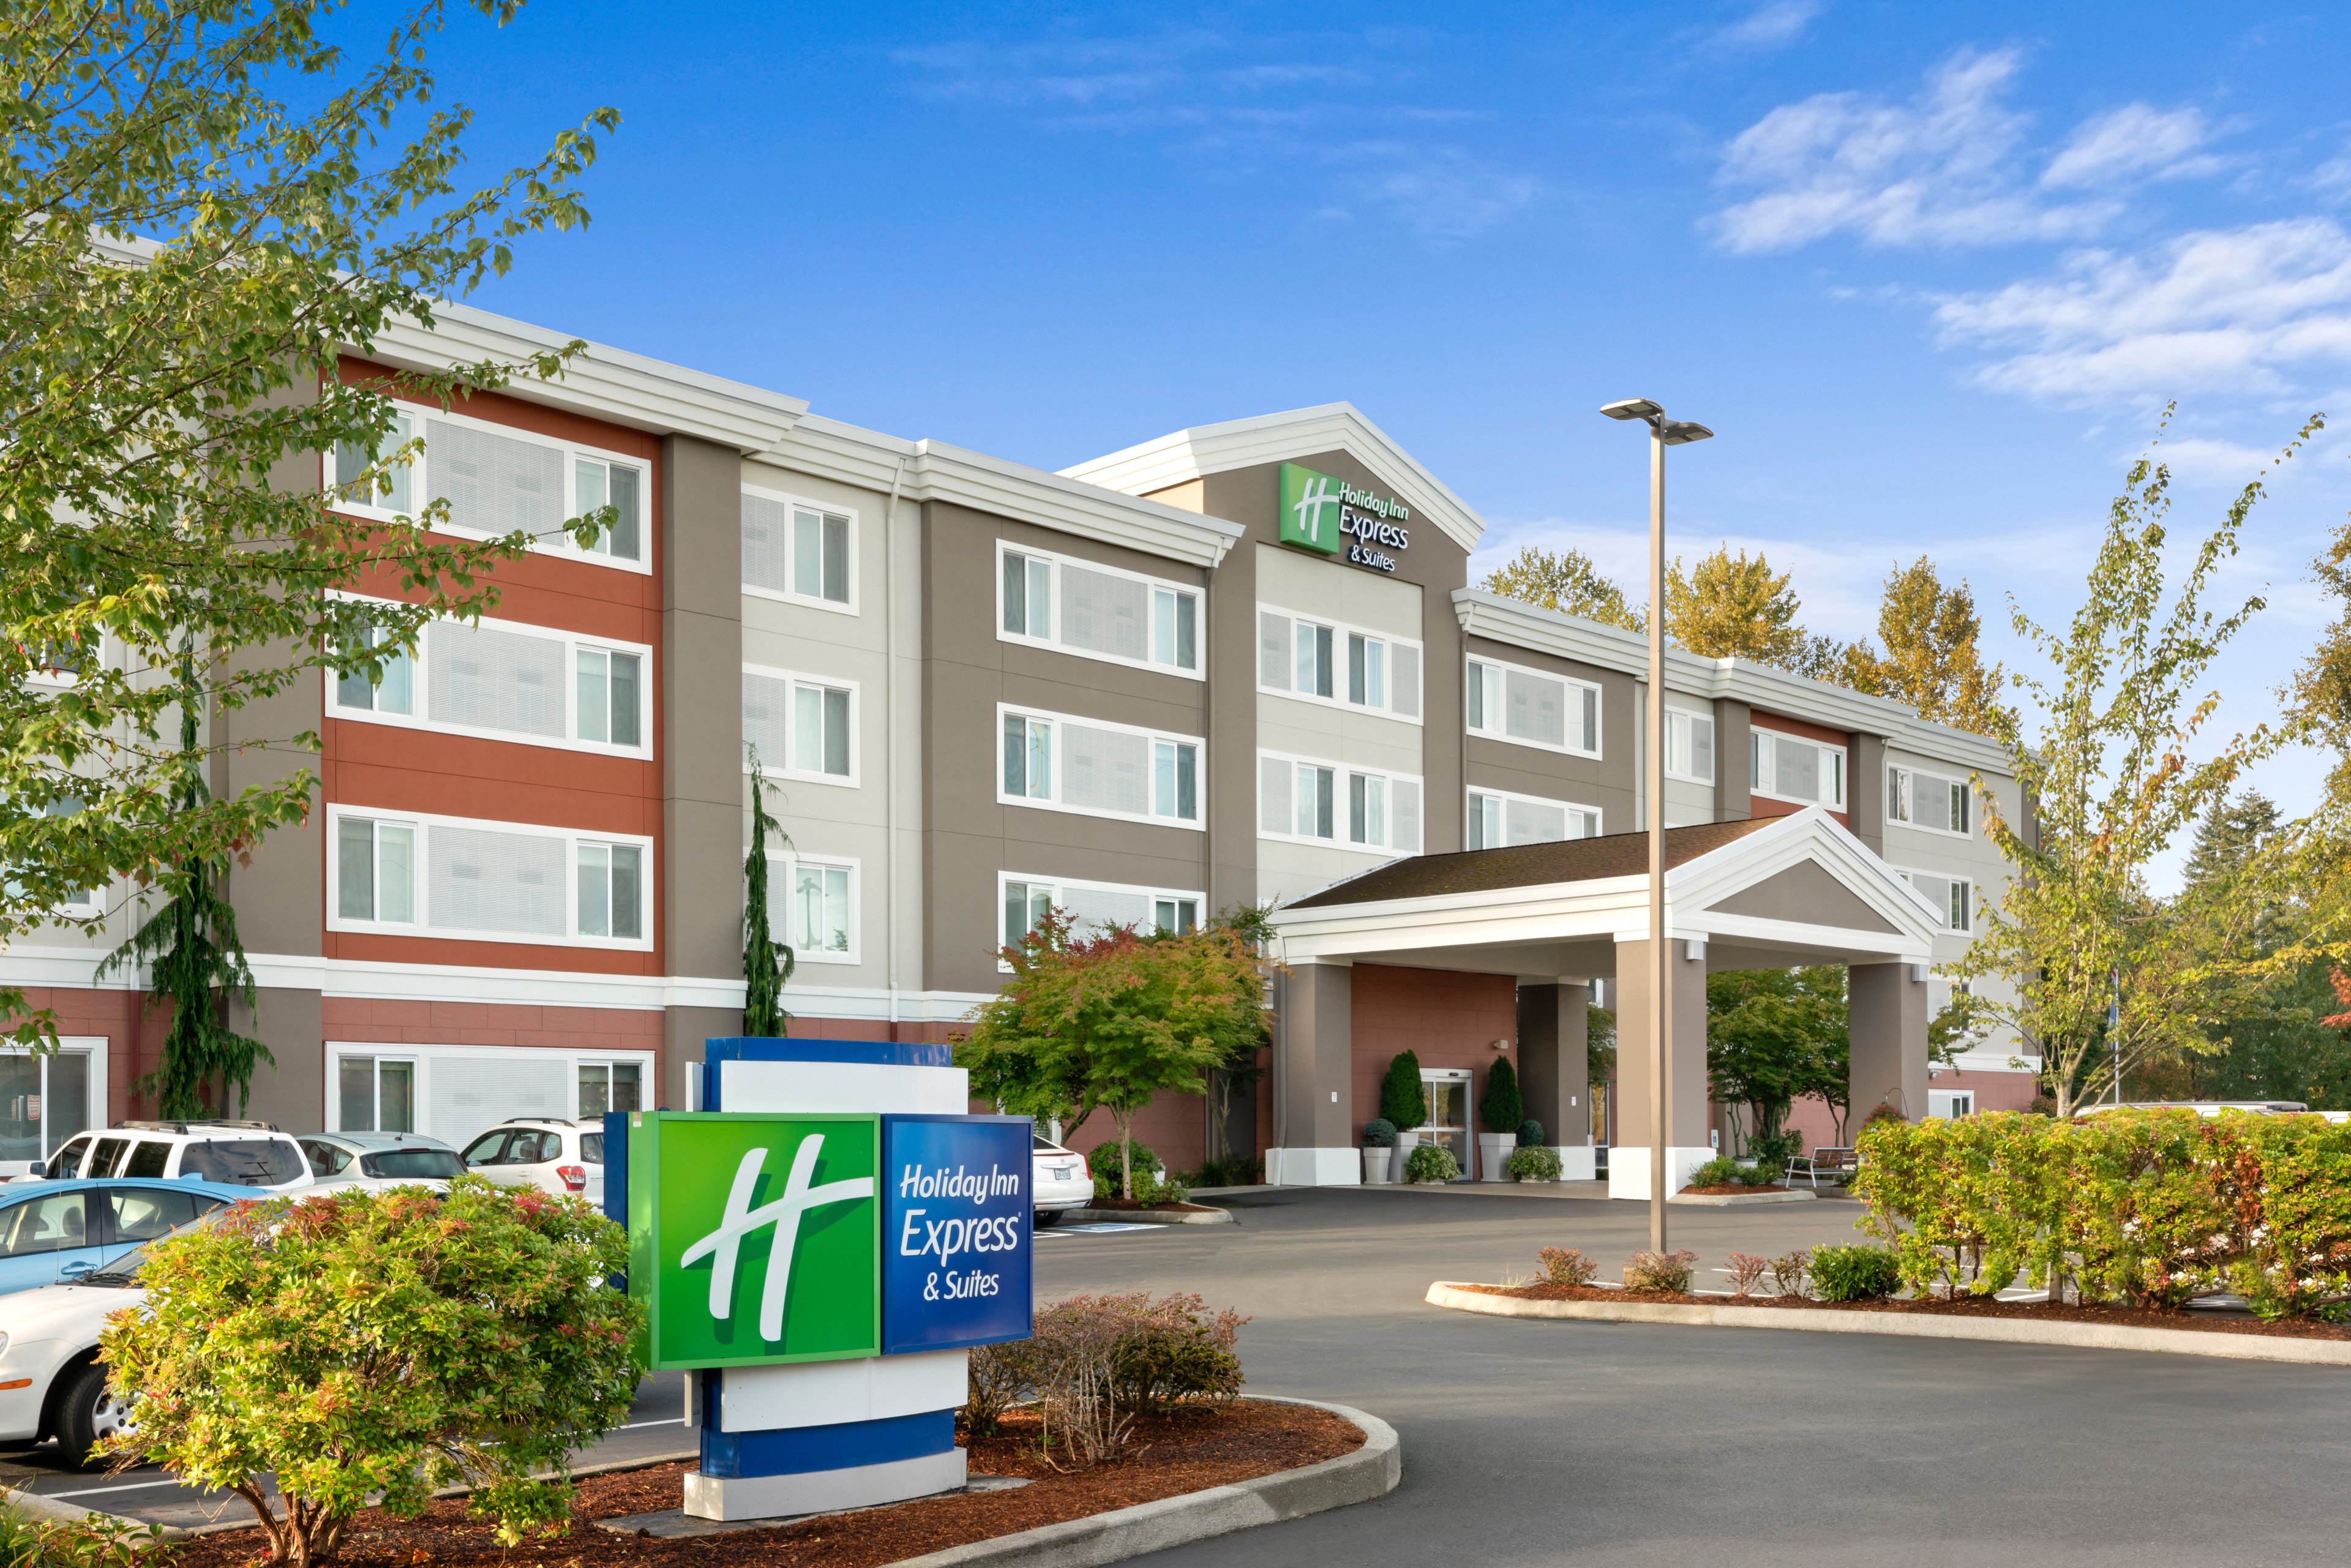 Welcome to the Holiday Inn Express Marysville